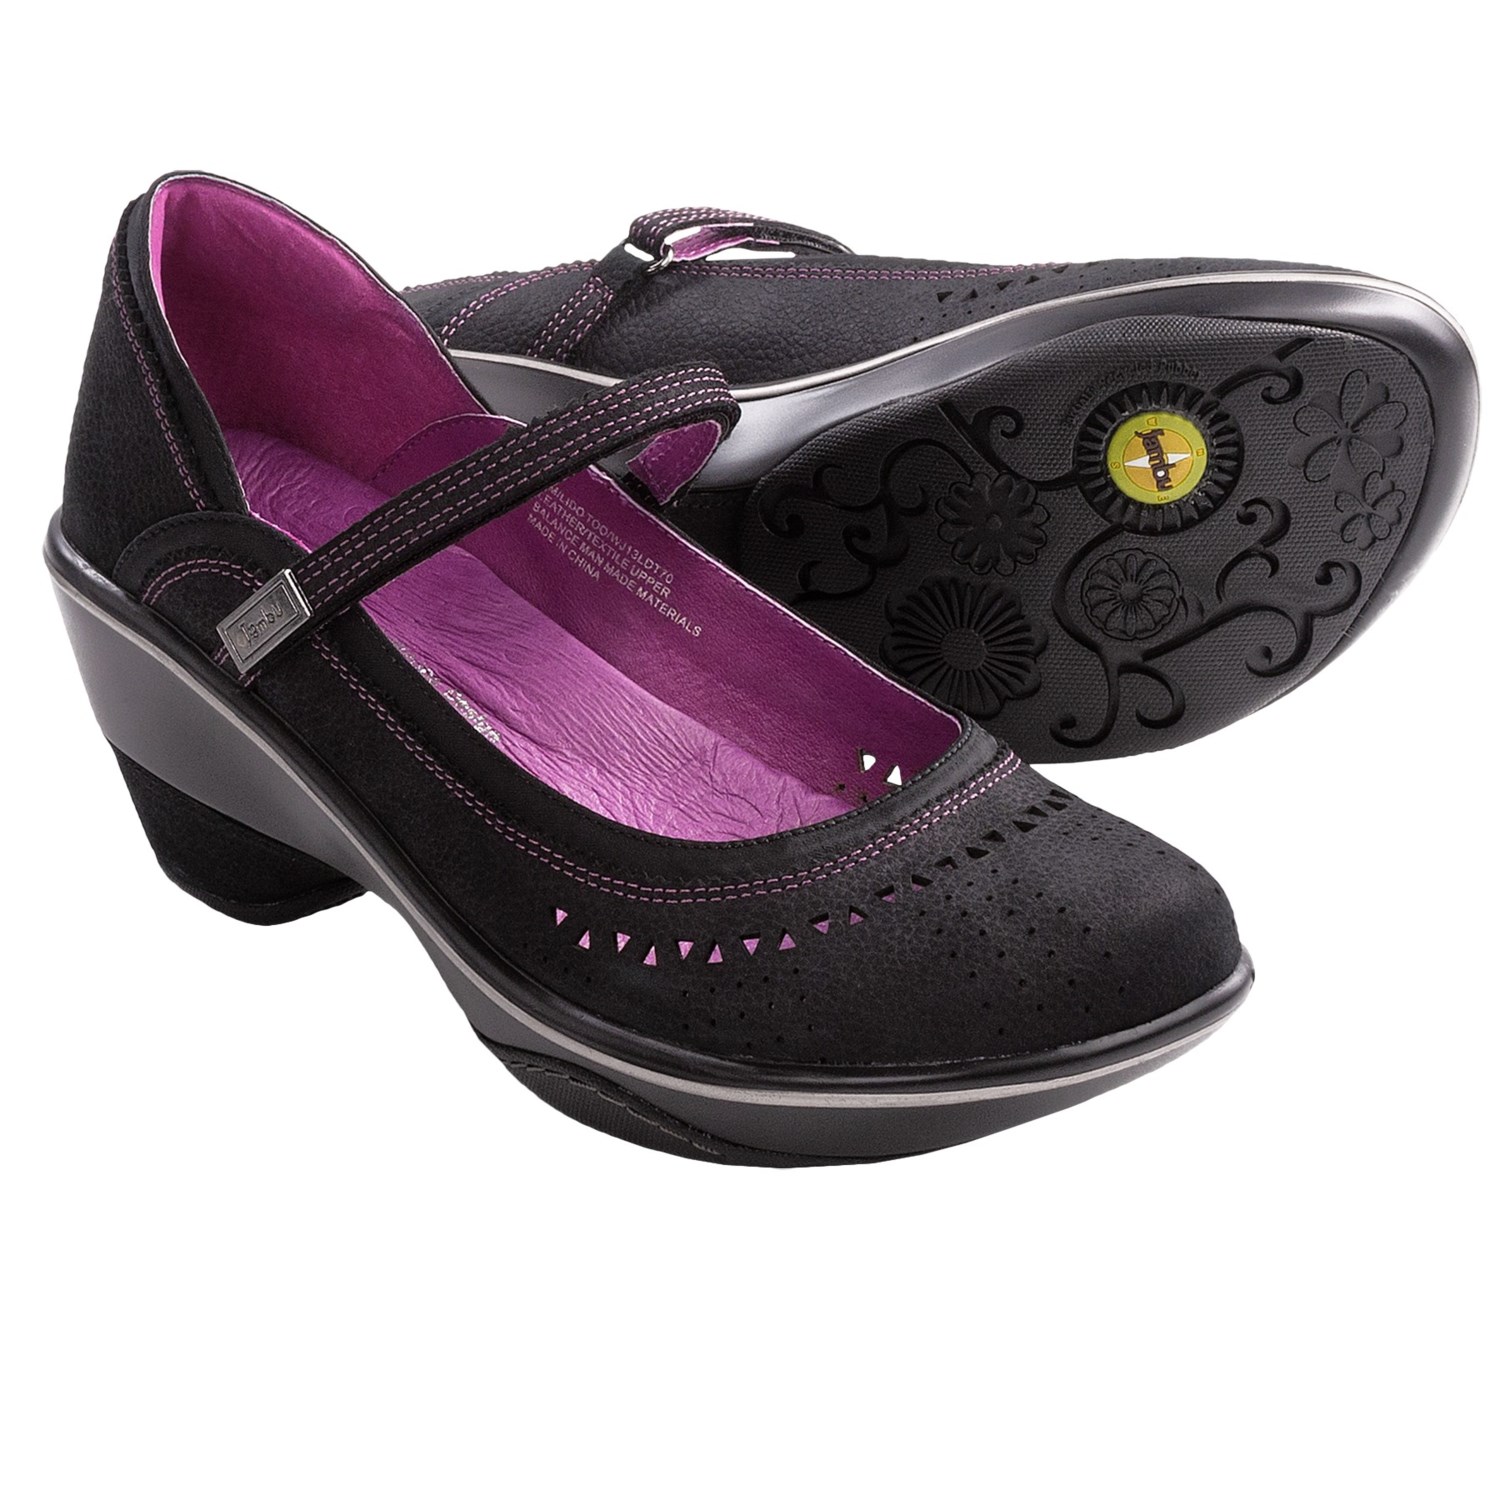 Jambu Shoes up to 56% off at Sierra Trading Post